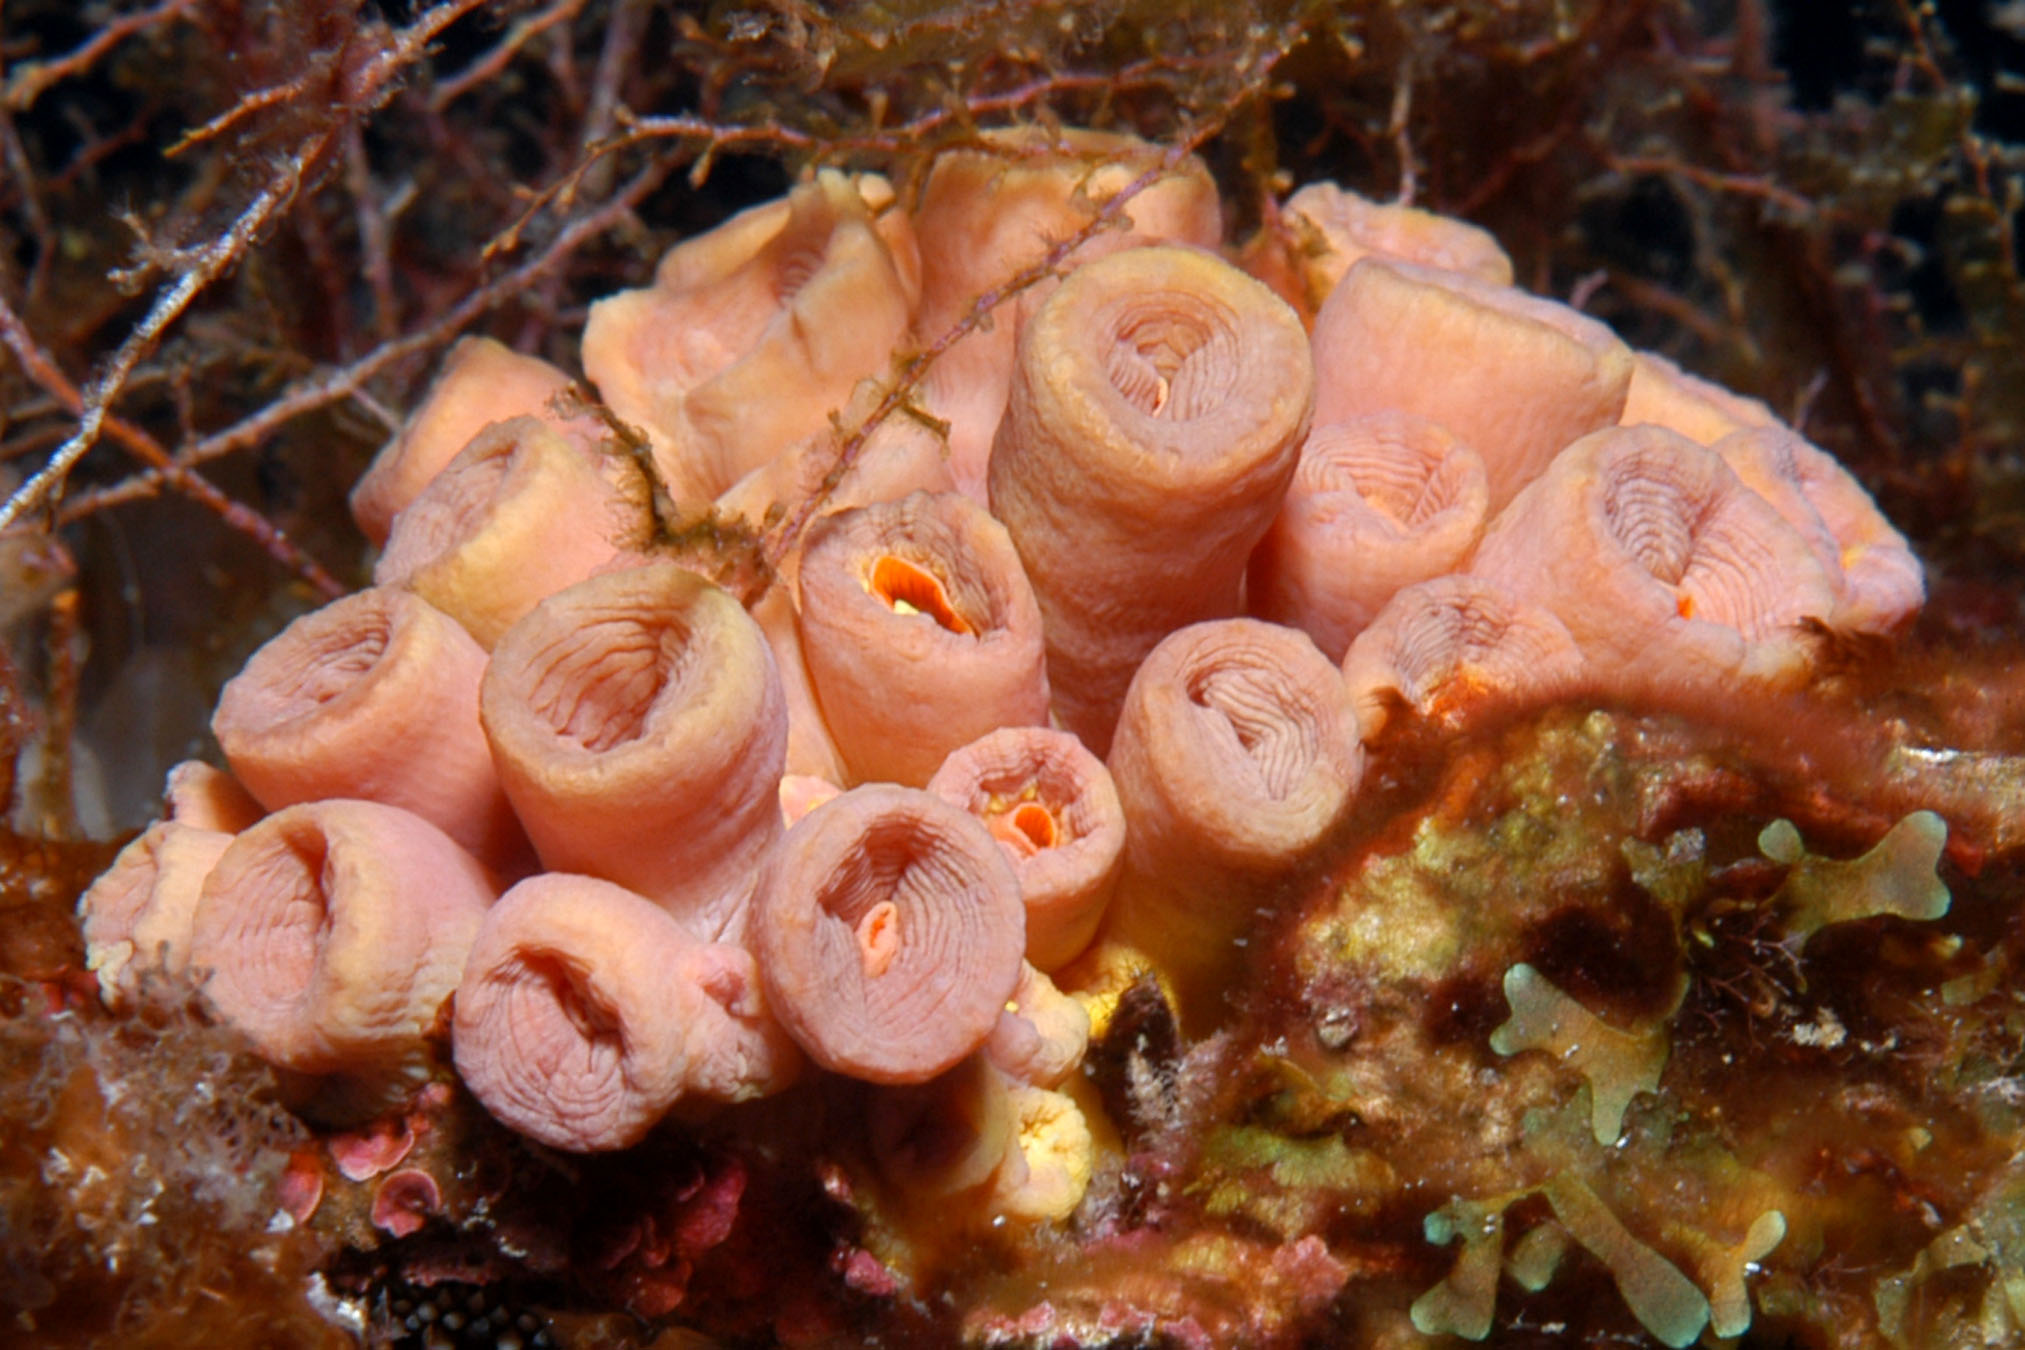 A colony of cup coral with tentacles withdrawn